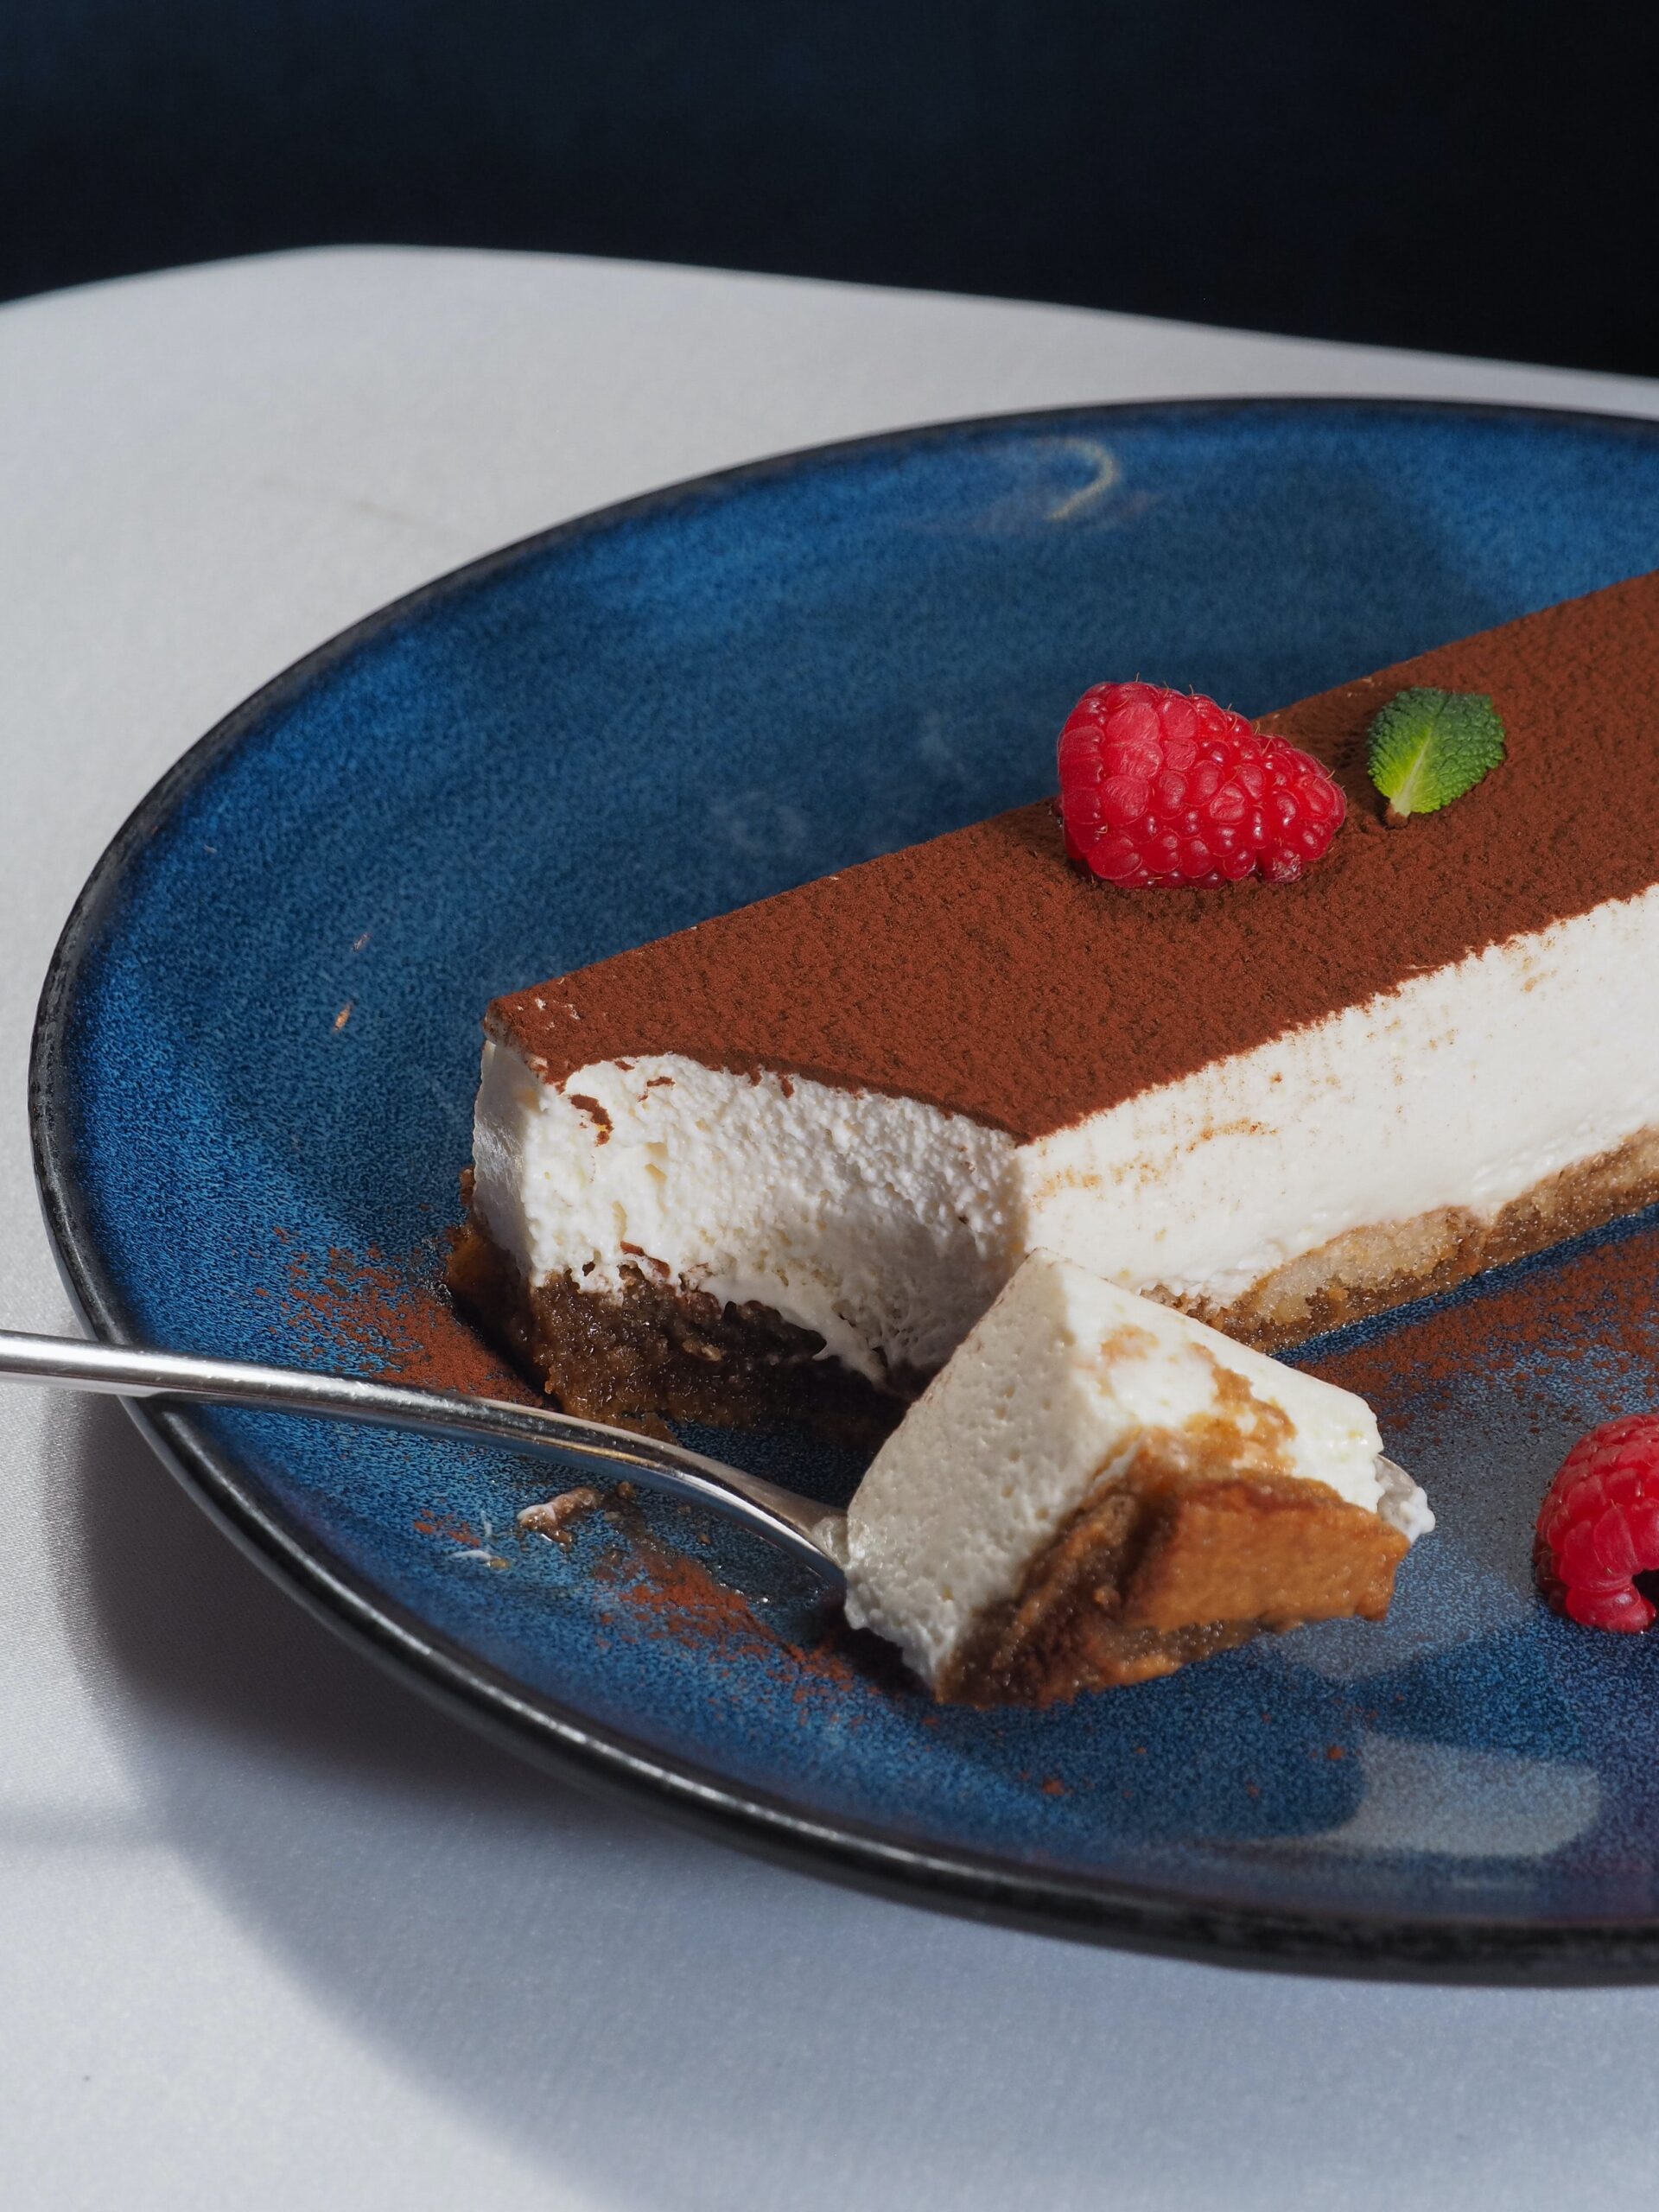 Whats Your Go-to French Dessert That You Prepare For Special Occasions?